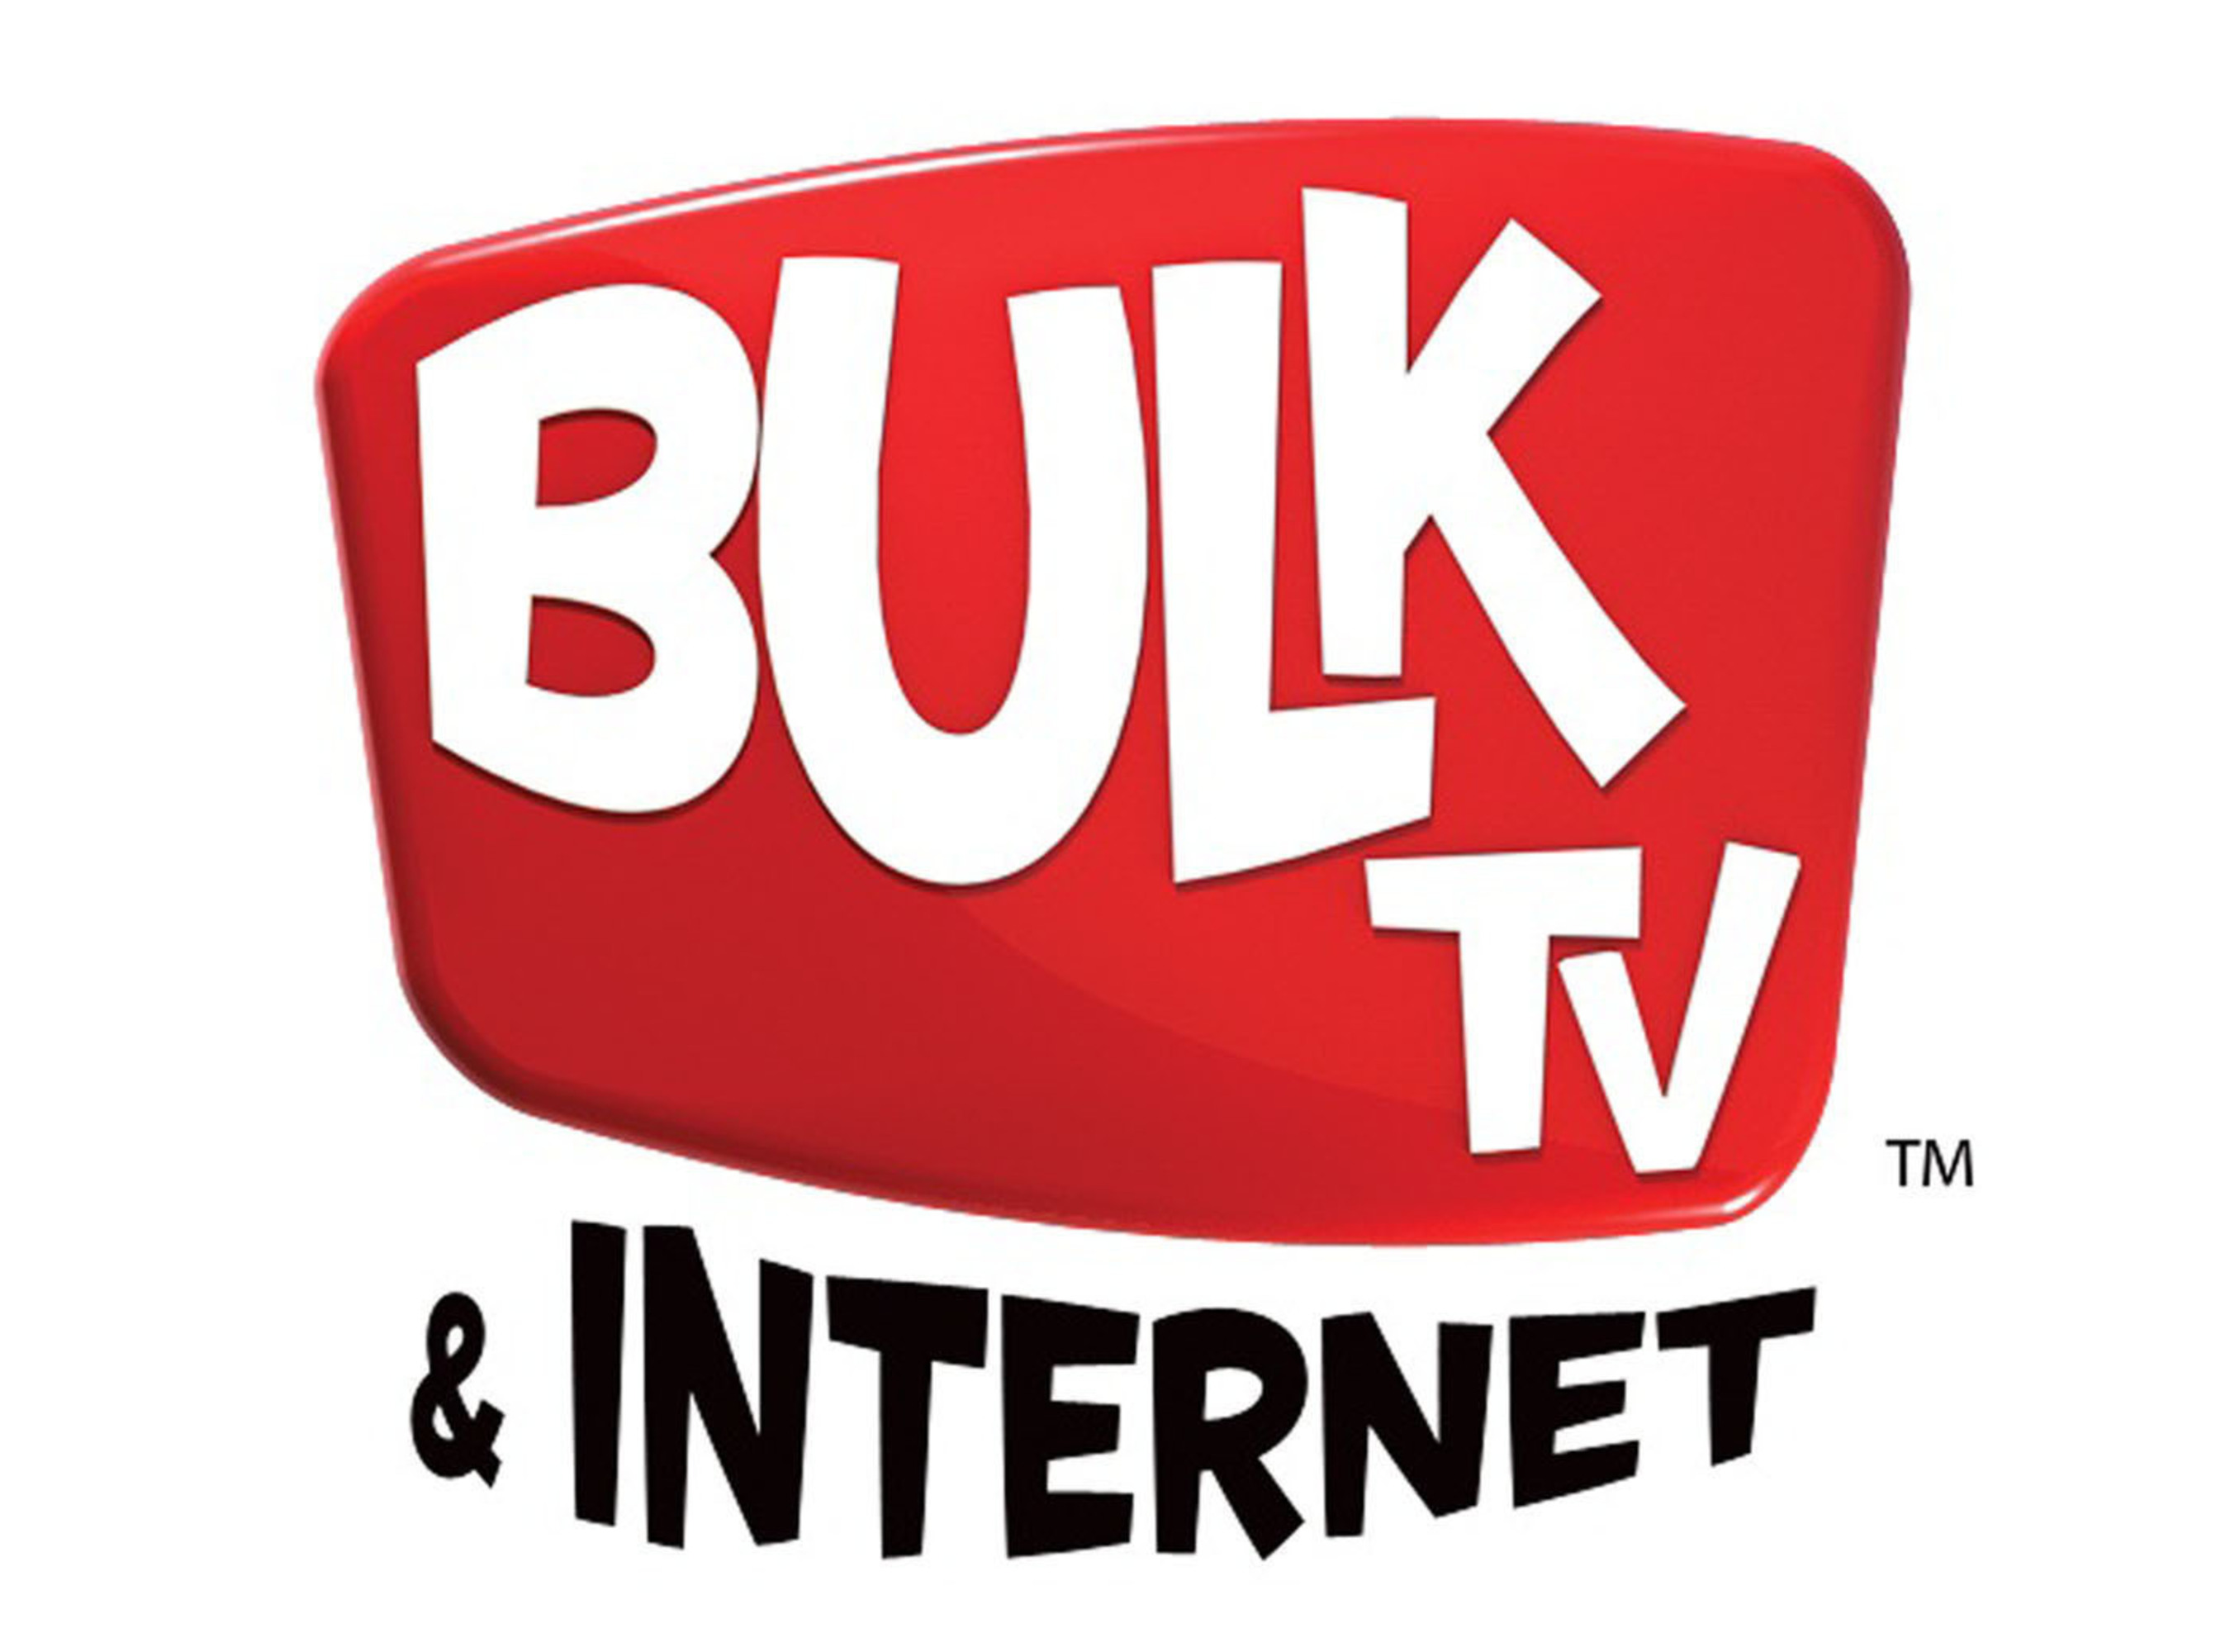 Bulk TV & Internet provides free-to-guest television services to businesses nationwide